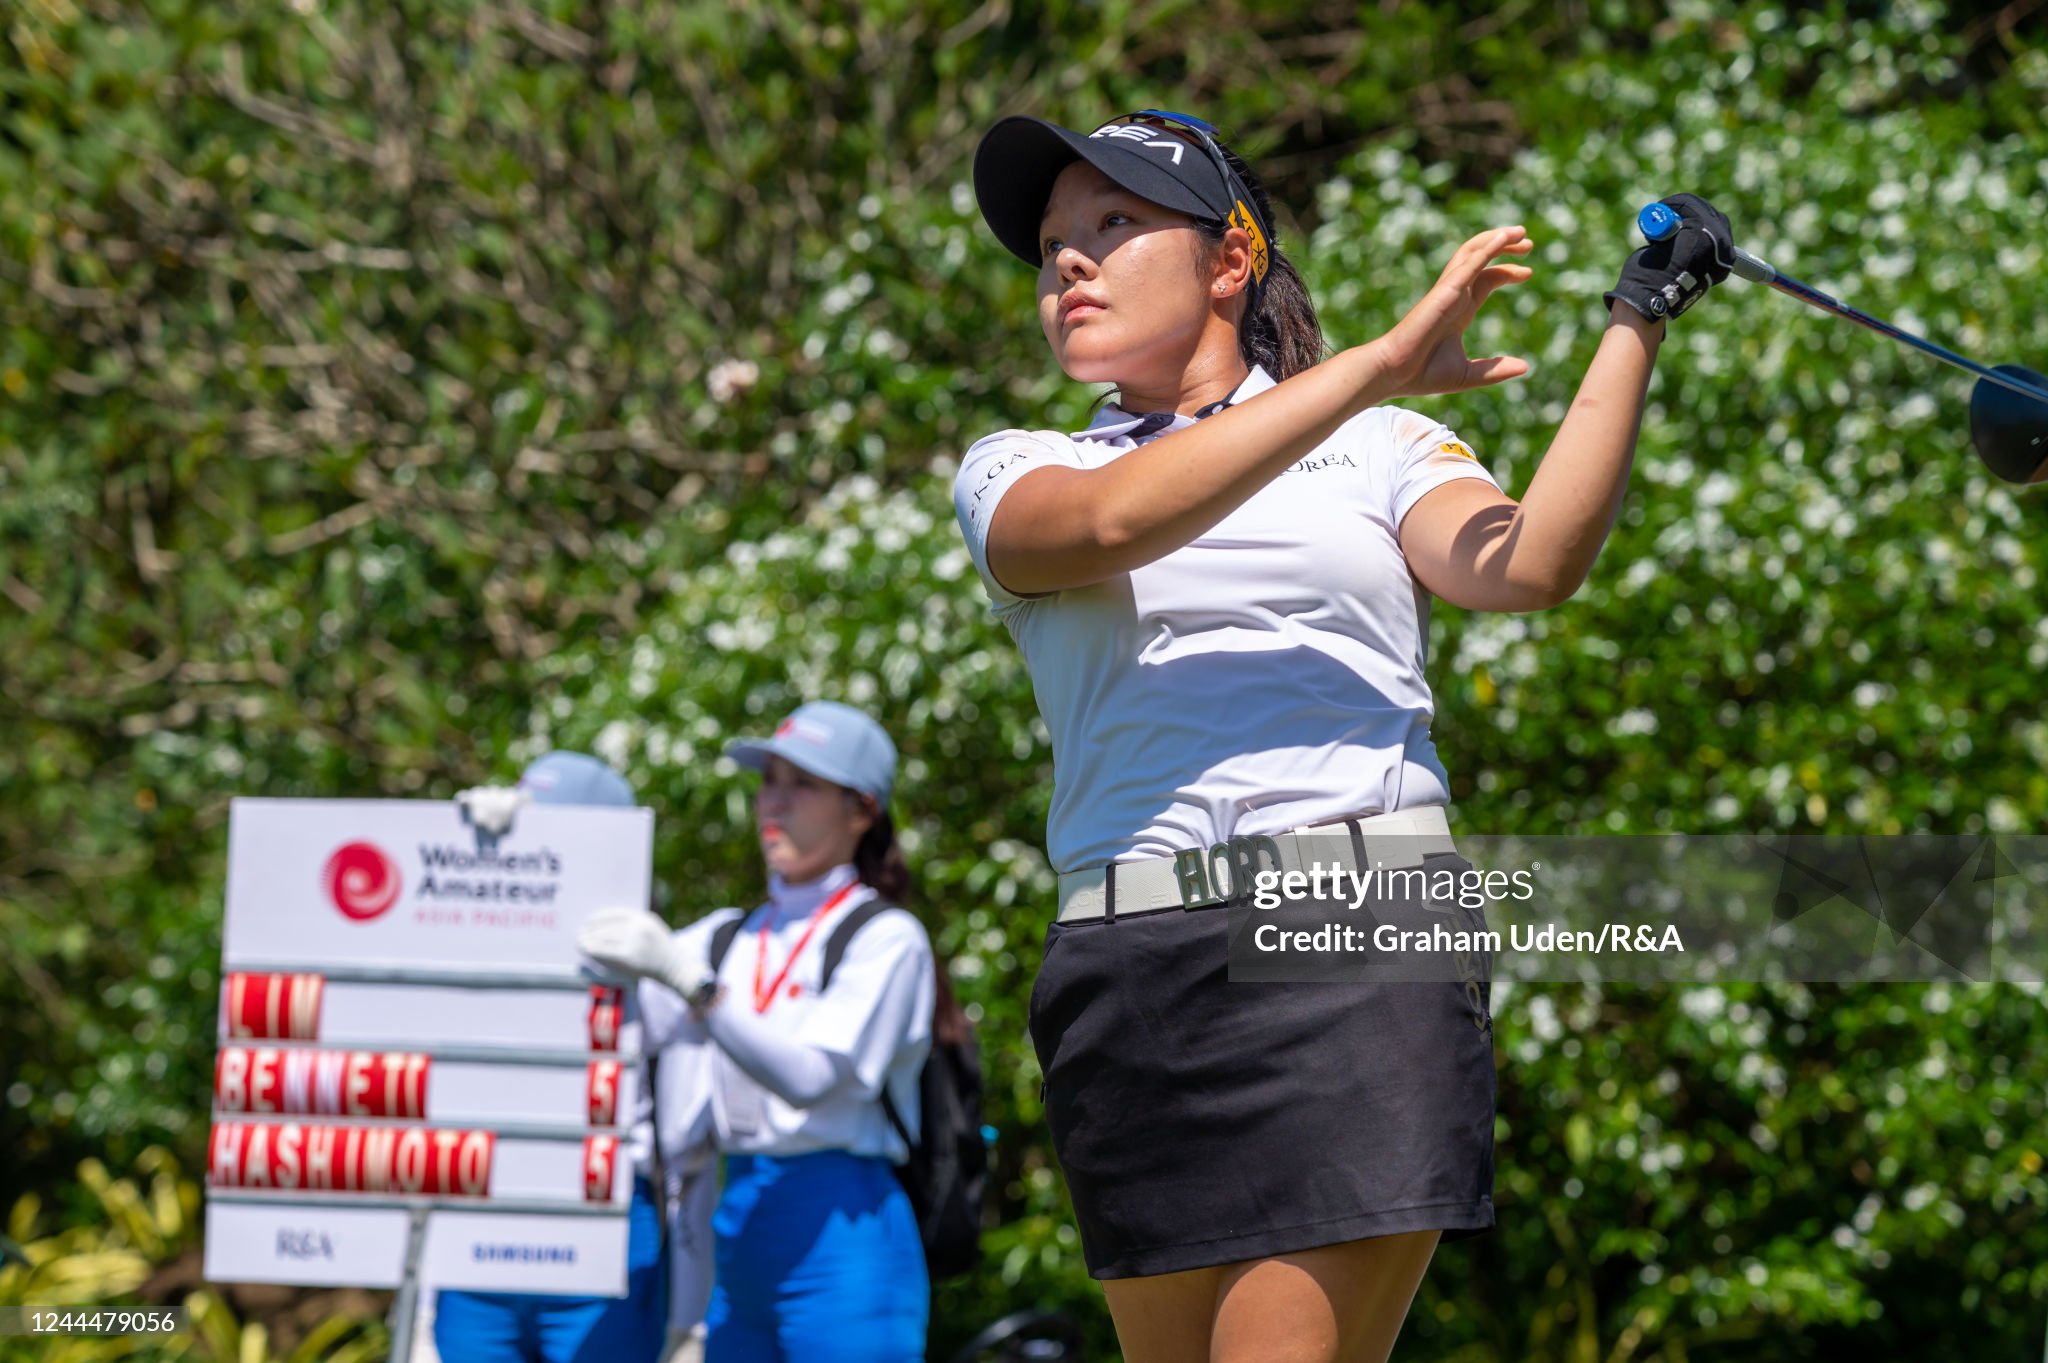 https://media.gettyimages.com/id/1244479056/photo/the-womens-amateur-asia-pacific-championship-day-two.jpg?s=2048x2048&w=gi&k=20&c=G34CiB8d3BFwTE1h15yF4dZx2poBl_YjgElrgZbR6HI=